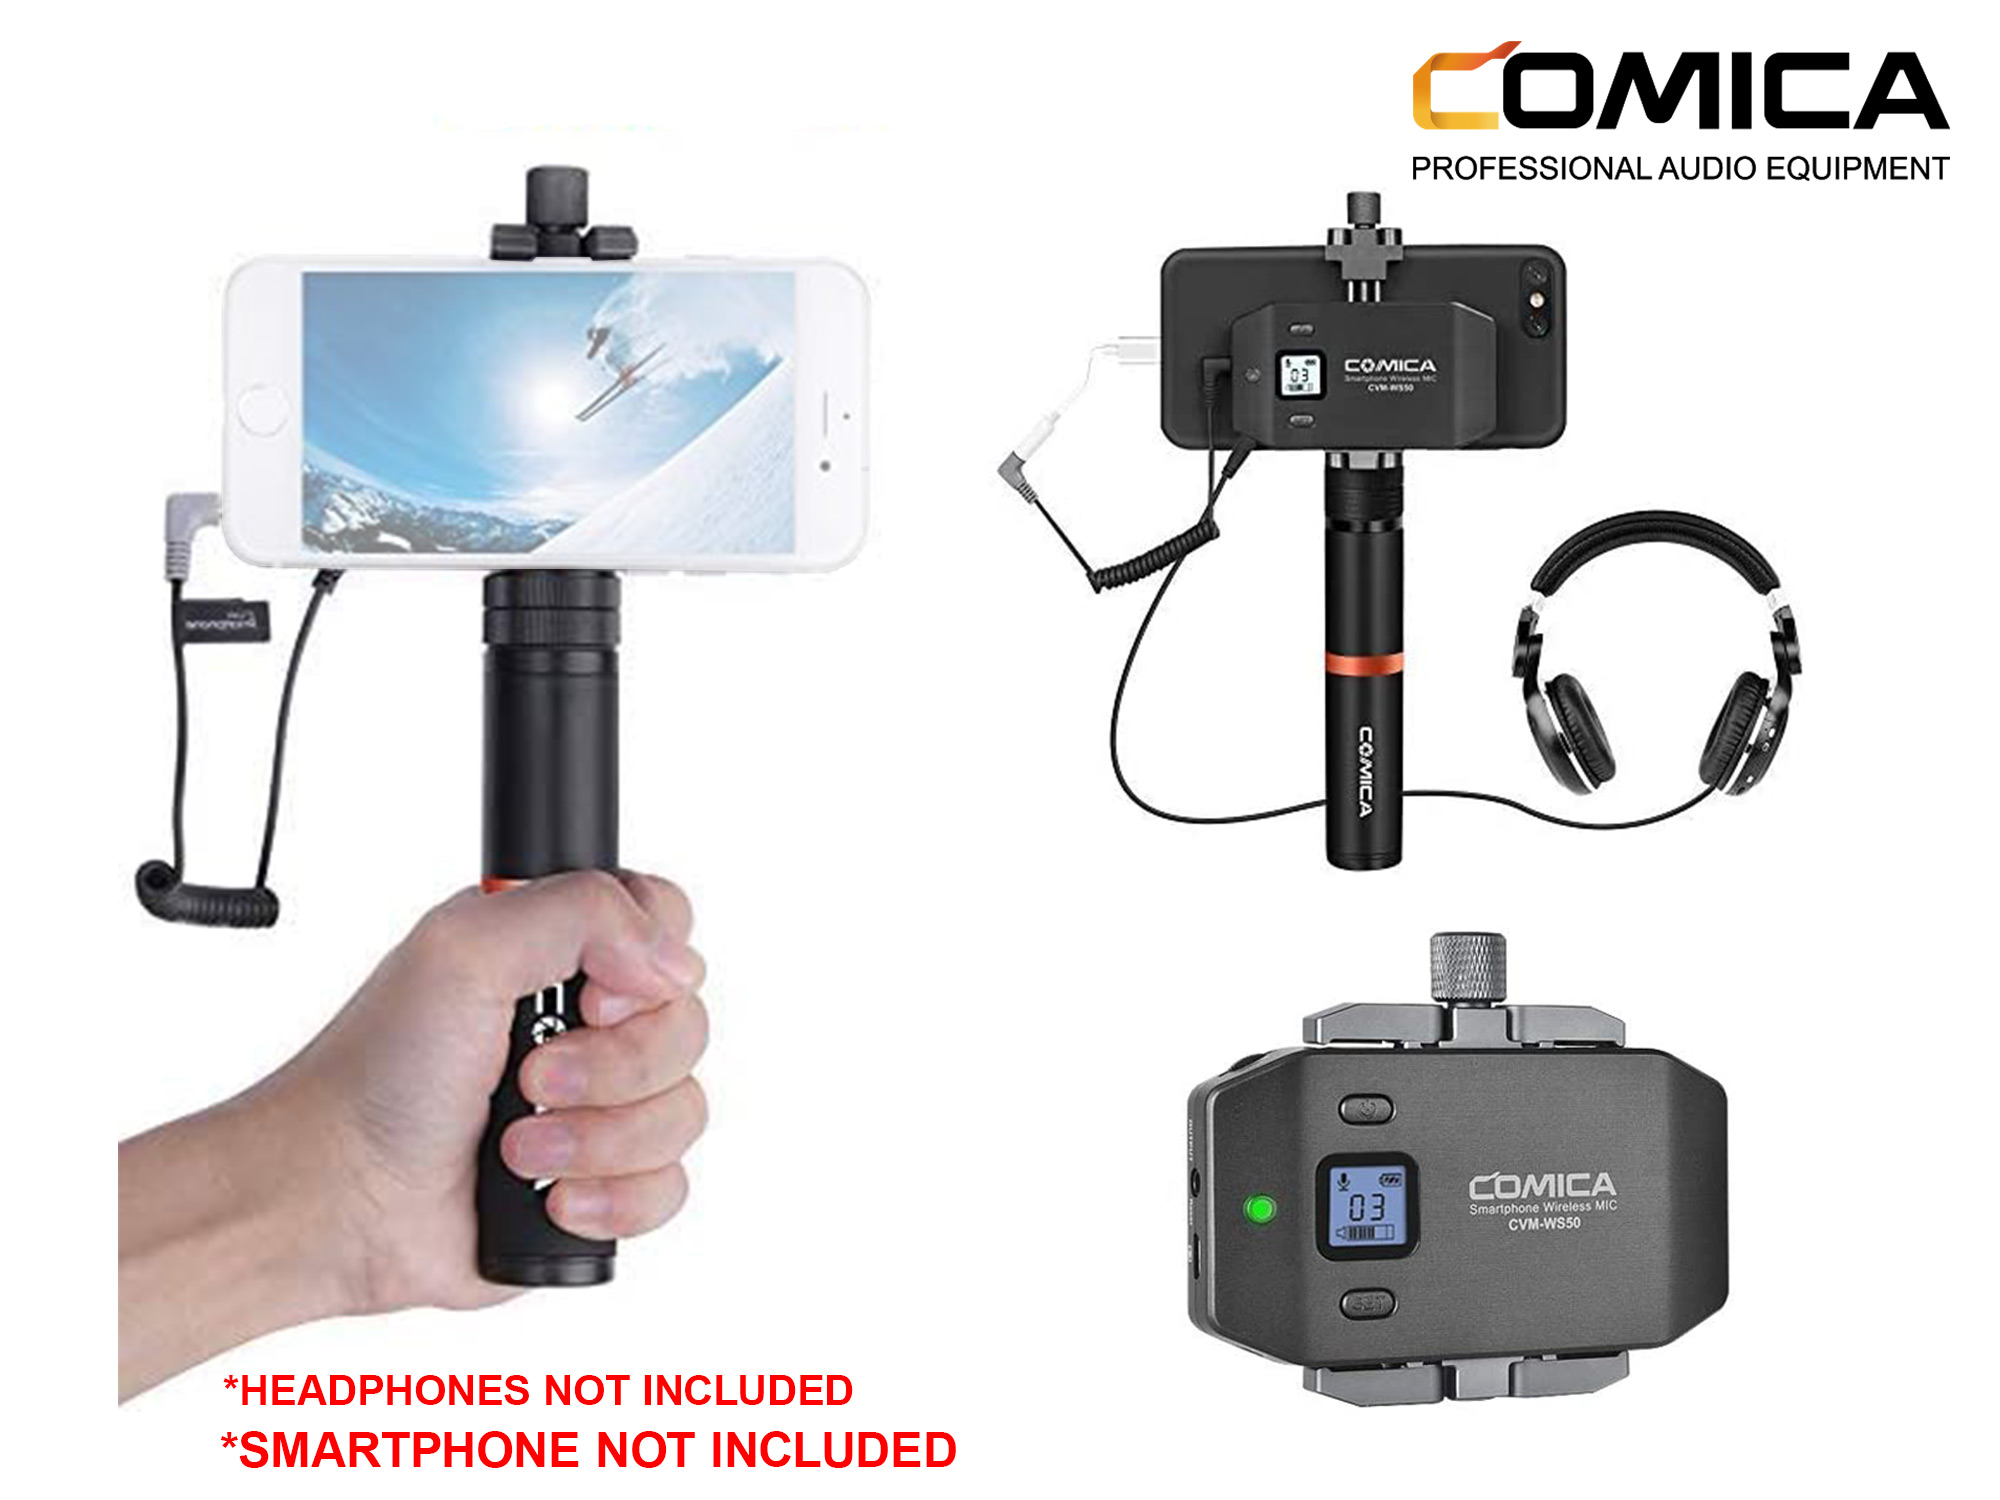 Comica 6 Channels Professional Handheld Microphone